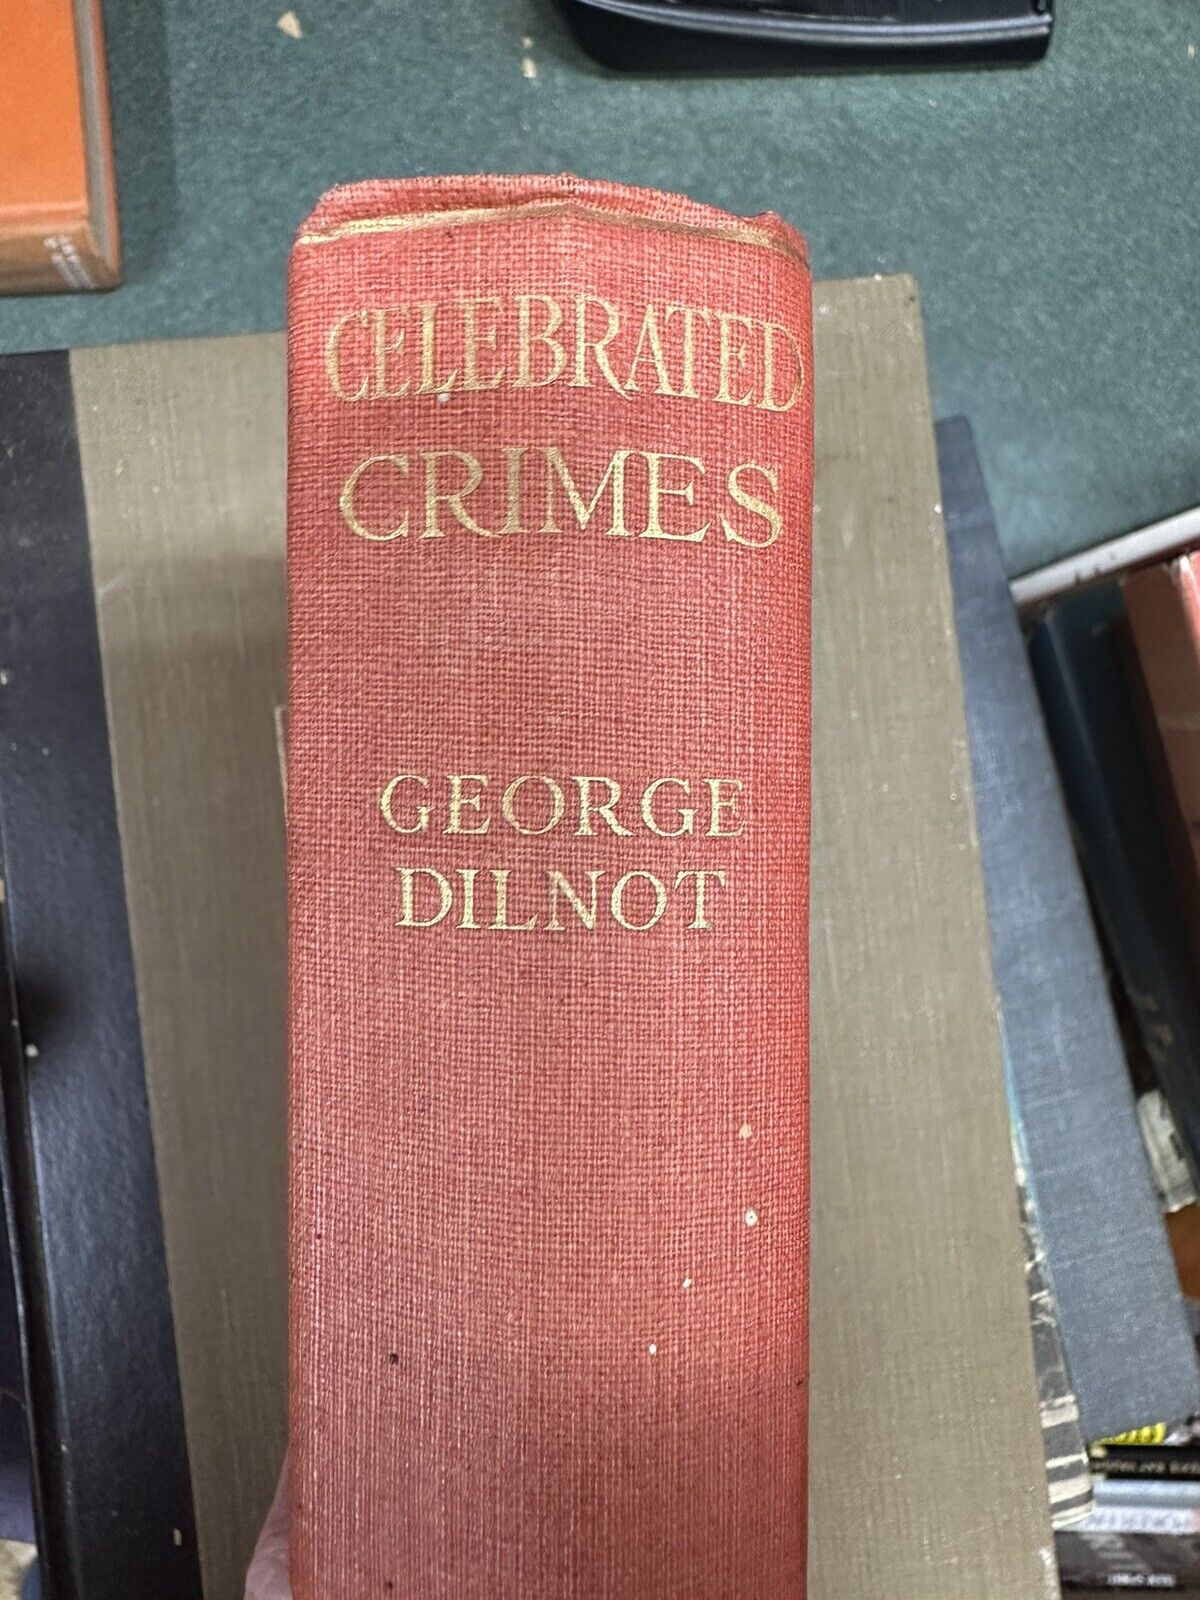 Celebrated Crimes by George Dilnot 1st Edition from 1925 VERY RARE